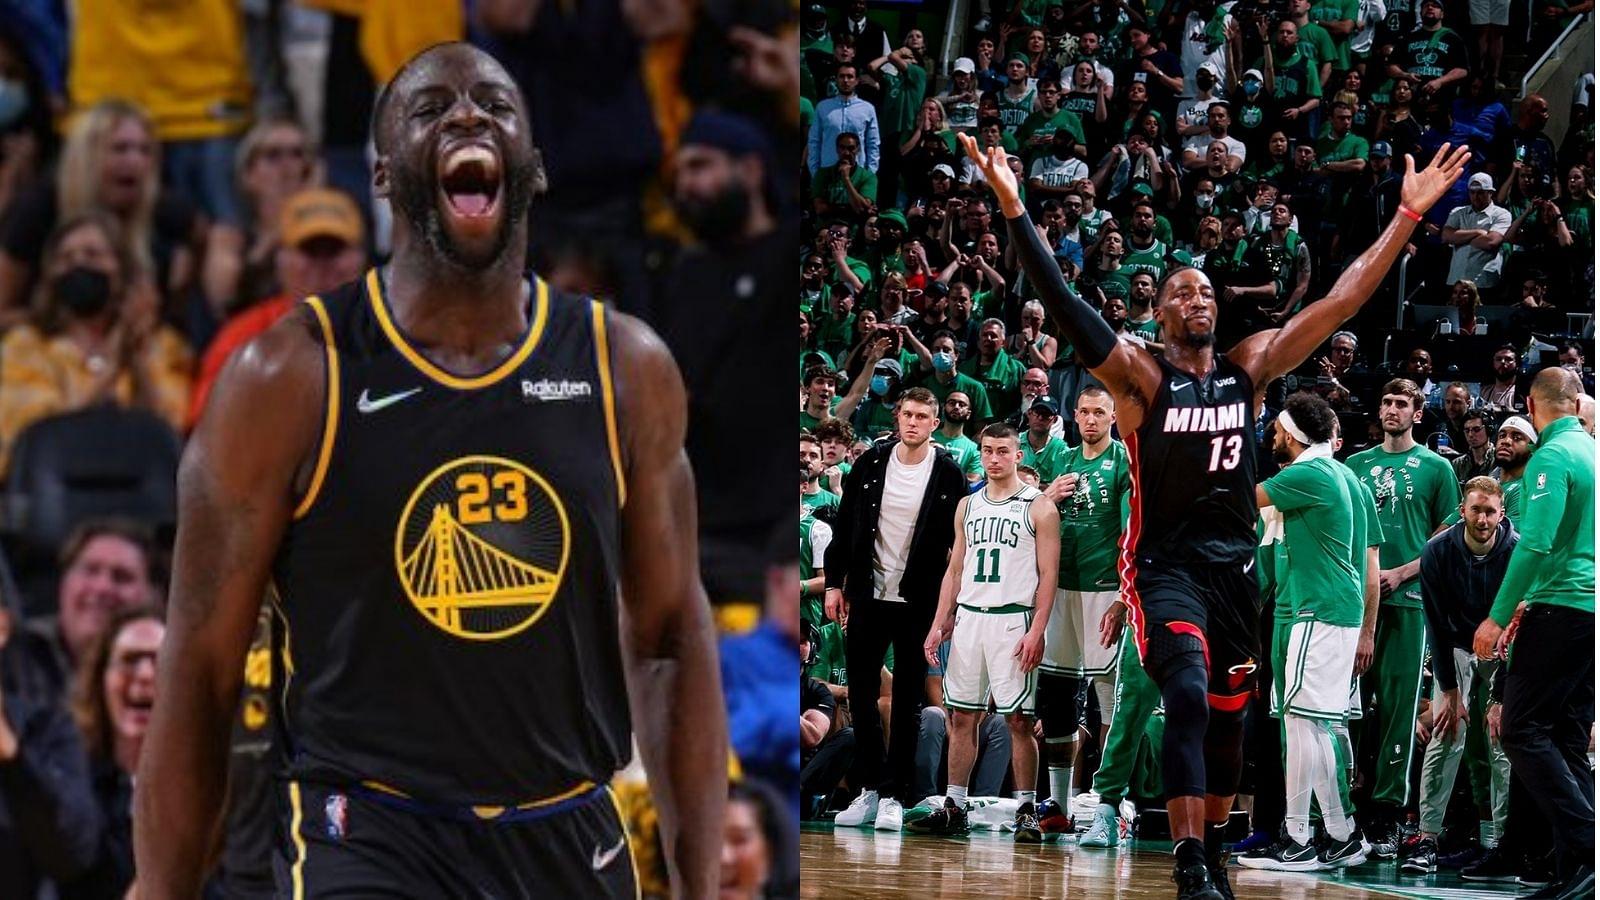 "Draymond Green firing up Miami so they and Celtics absolutely kill each other before Finals": NBA Twitter calls out Warriors forward's mind games after he and Dubs win WCF against Mavs